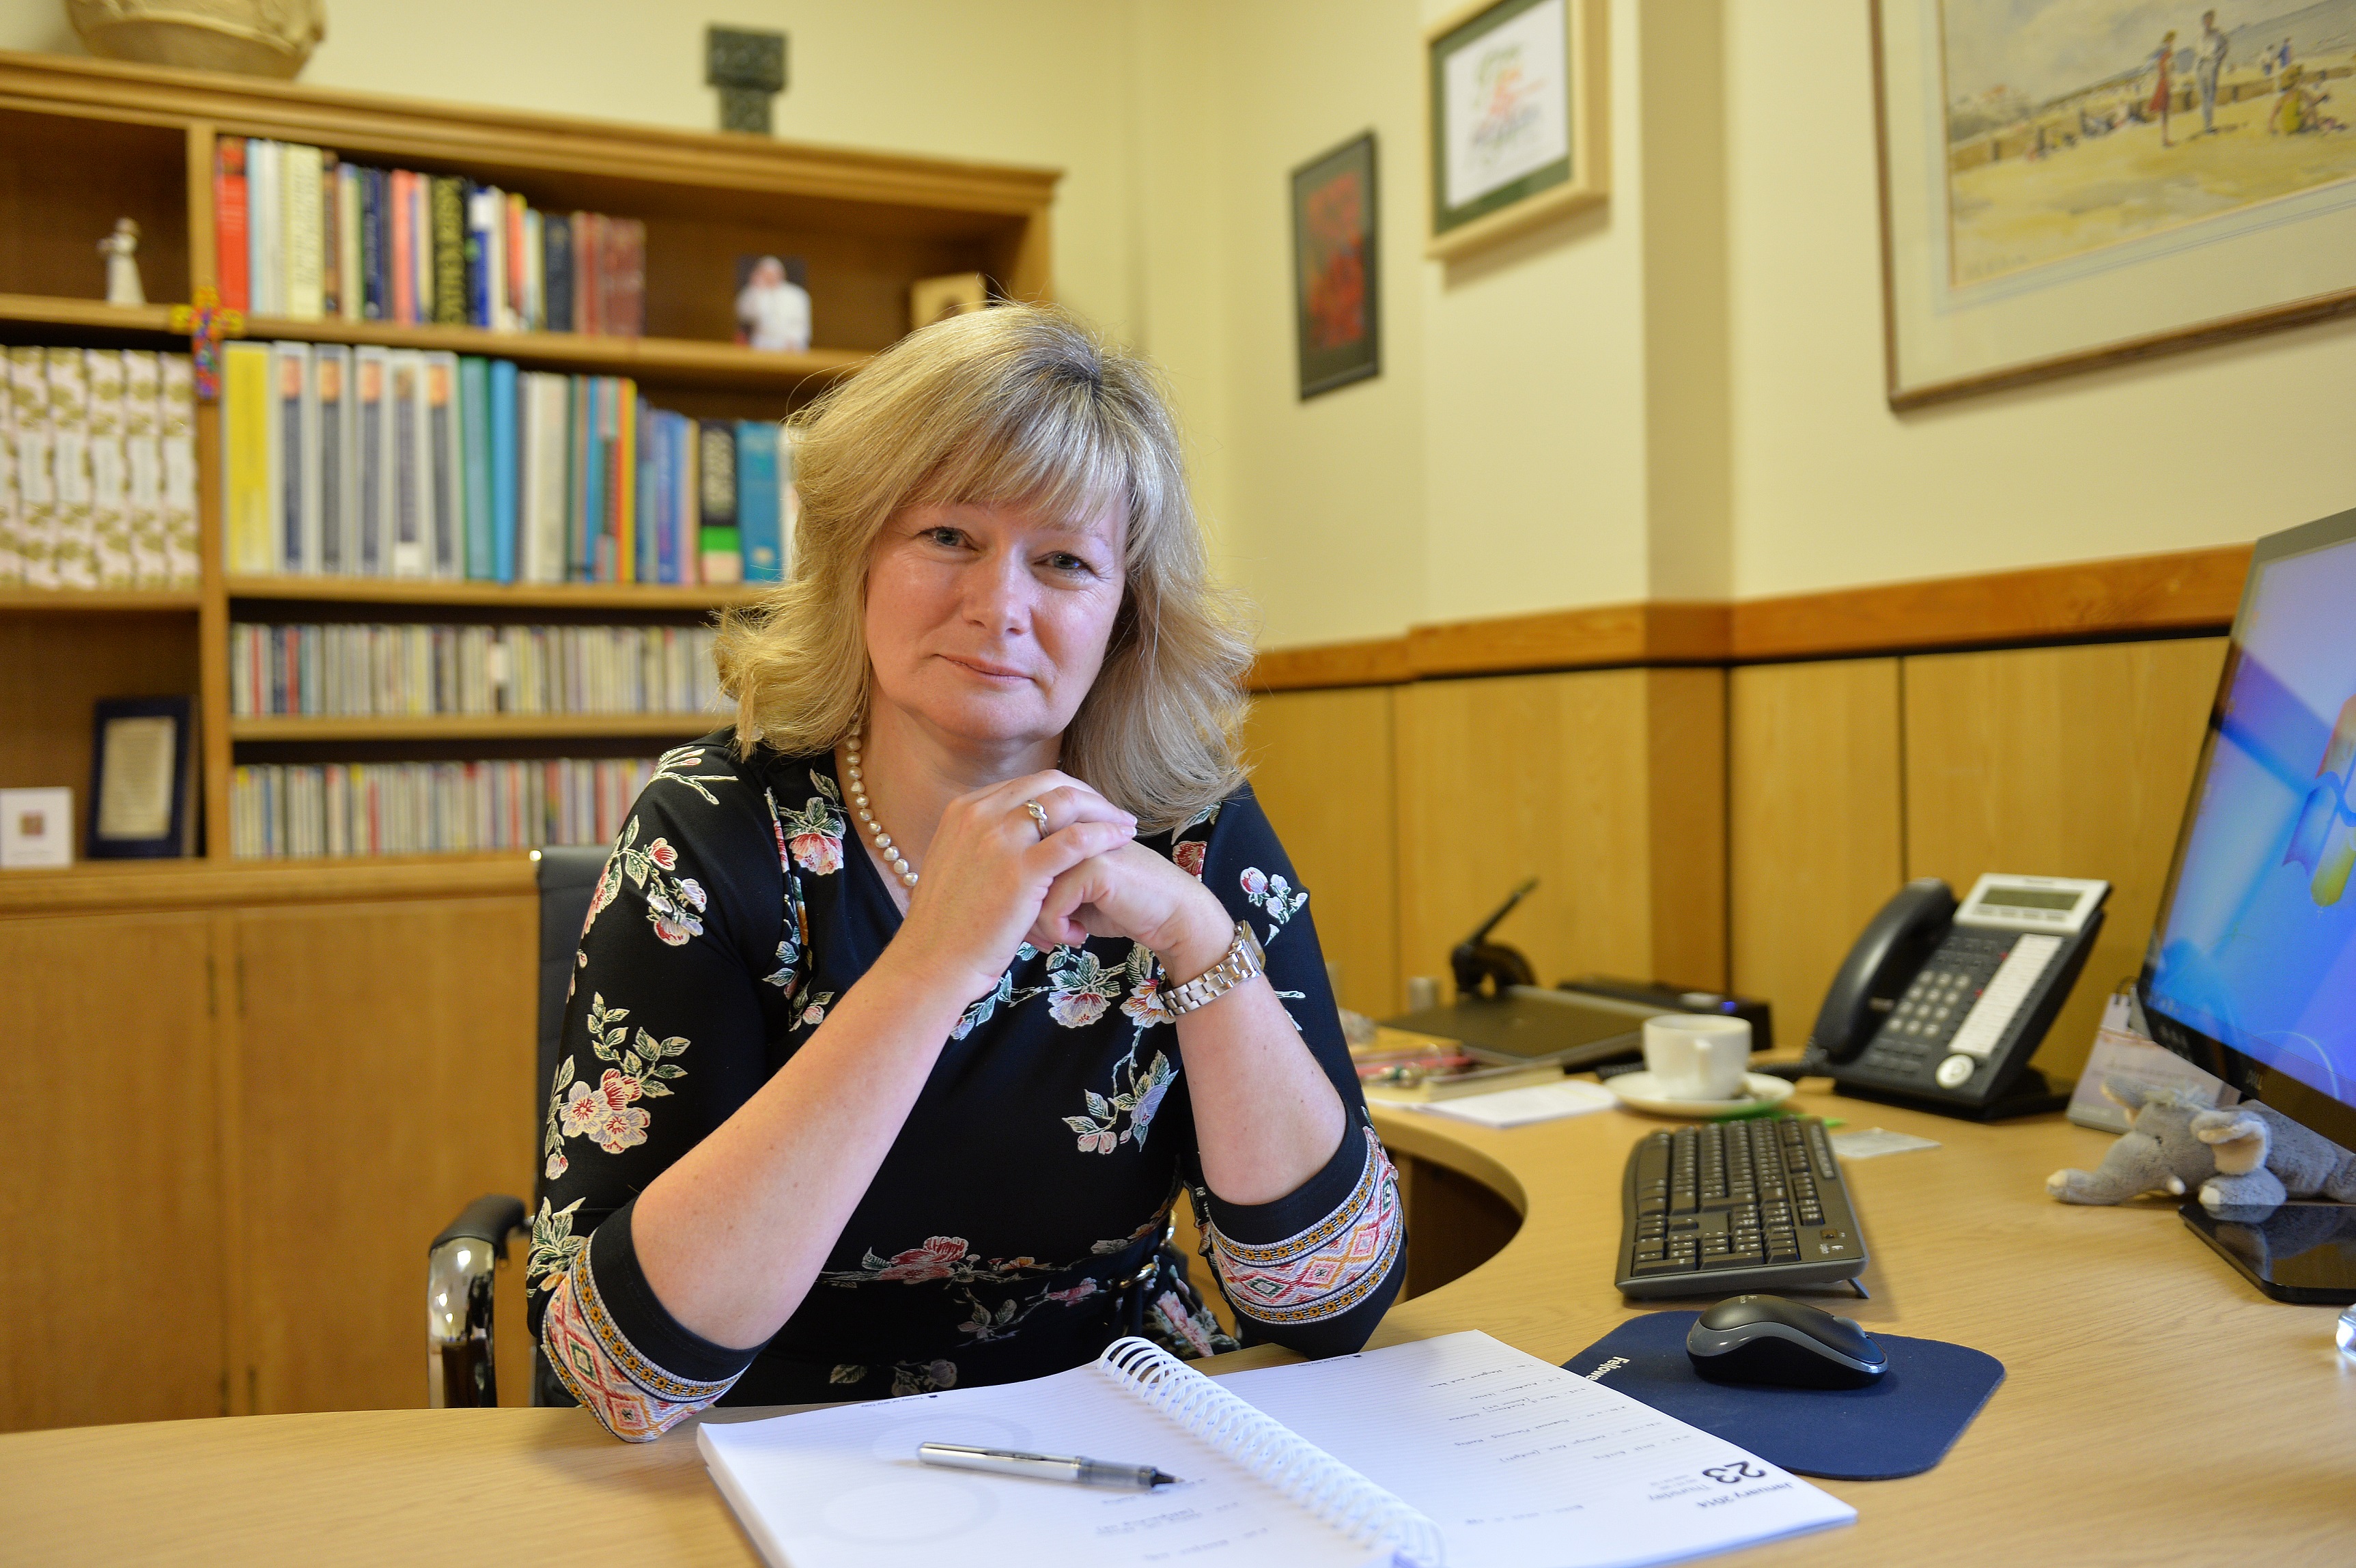 Ampleforth reverts to lay leadership, appointing first female head teacher 